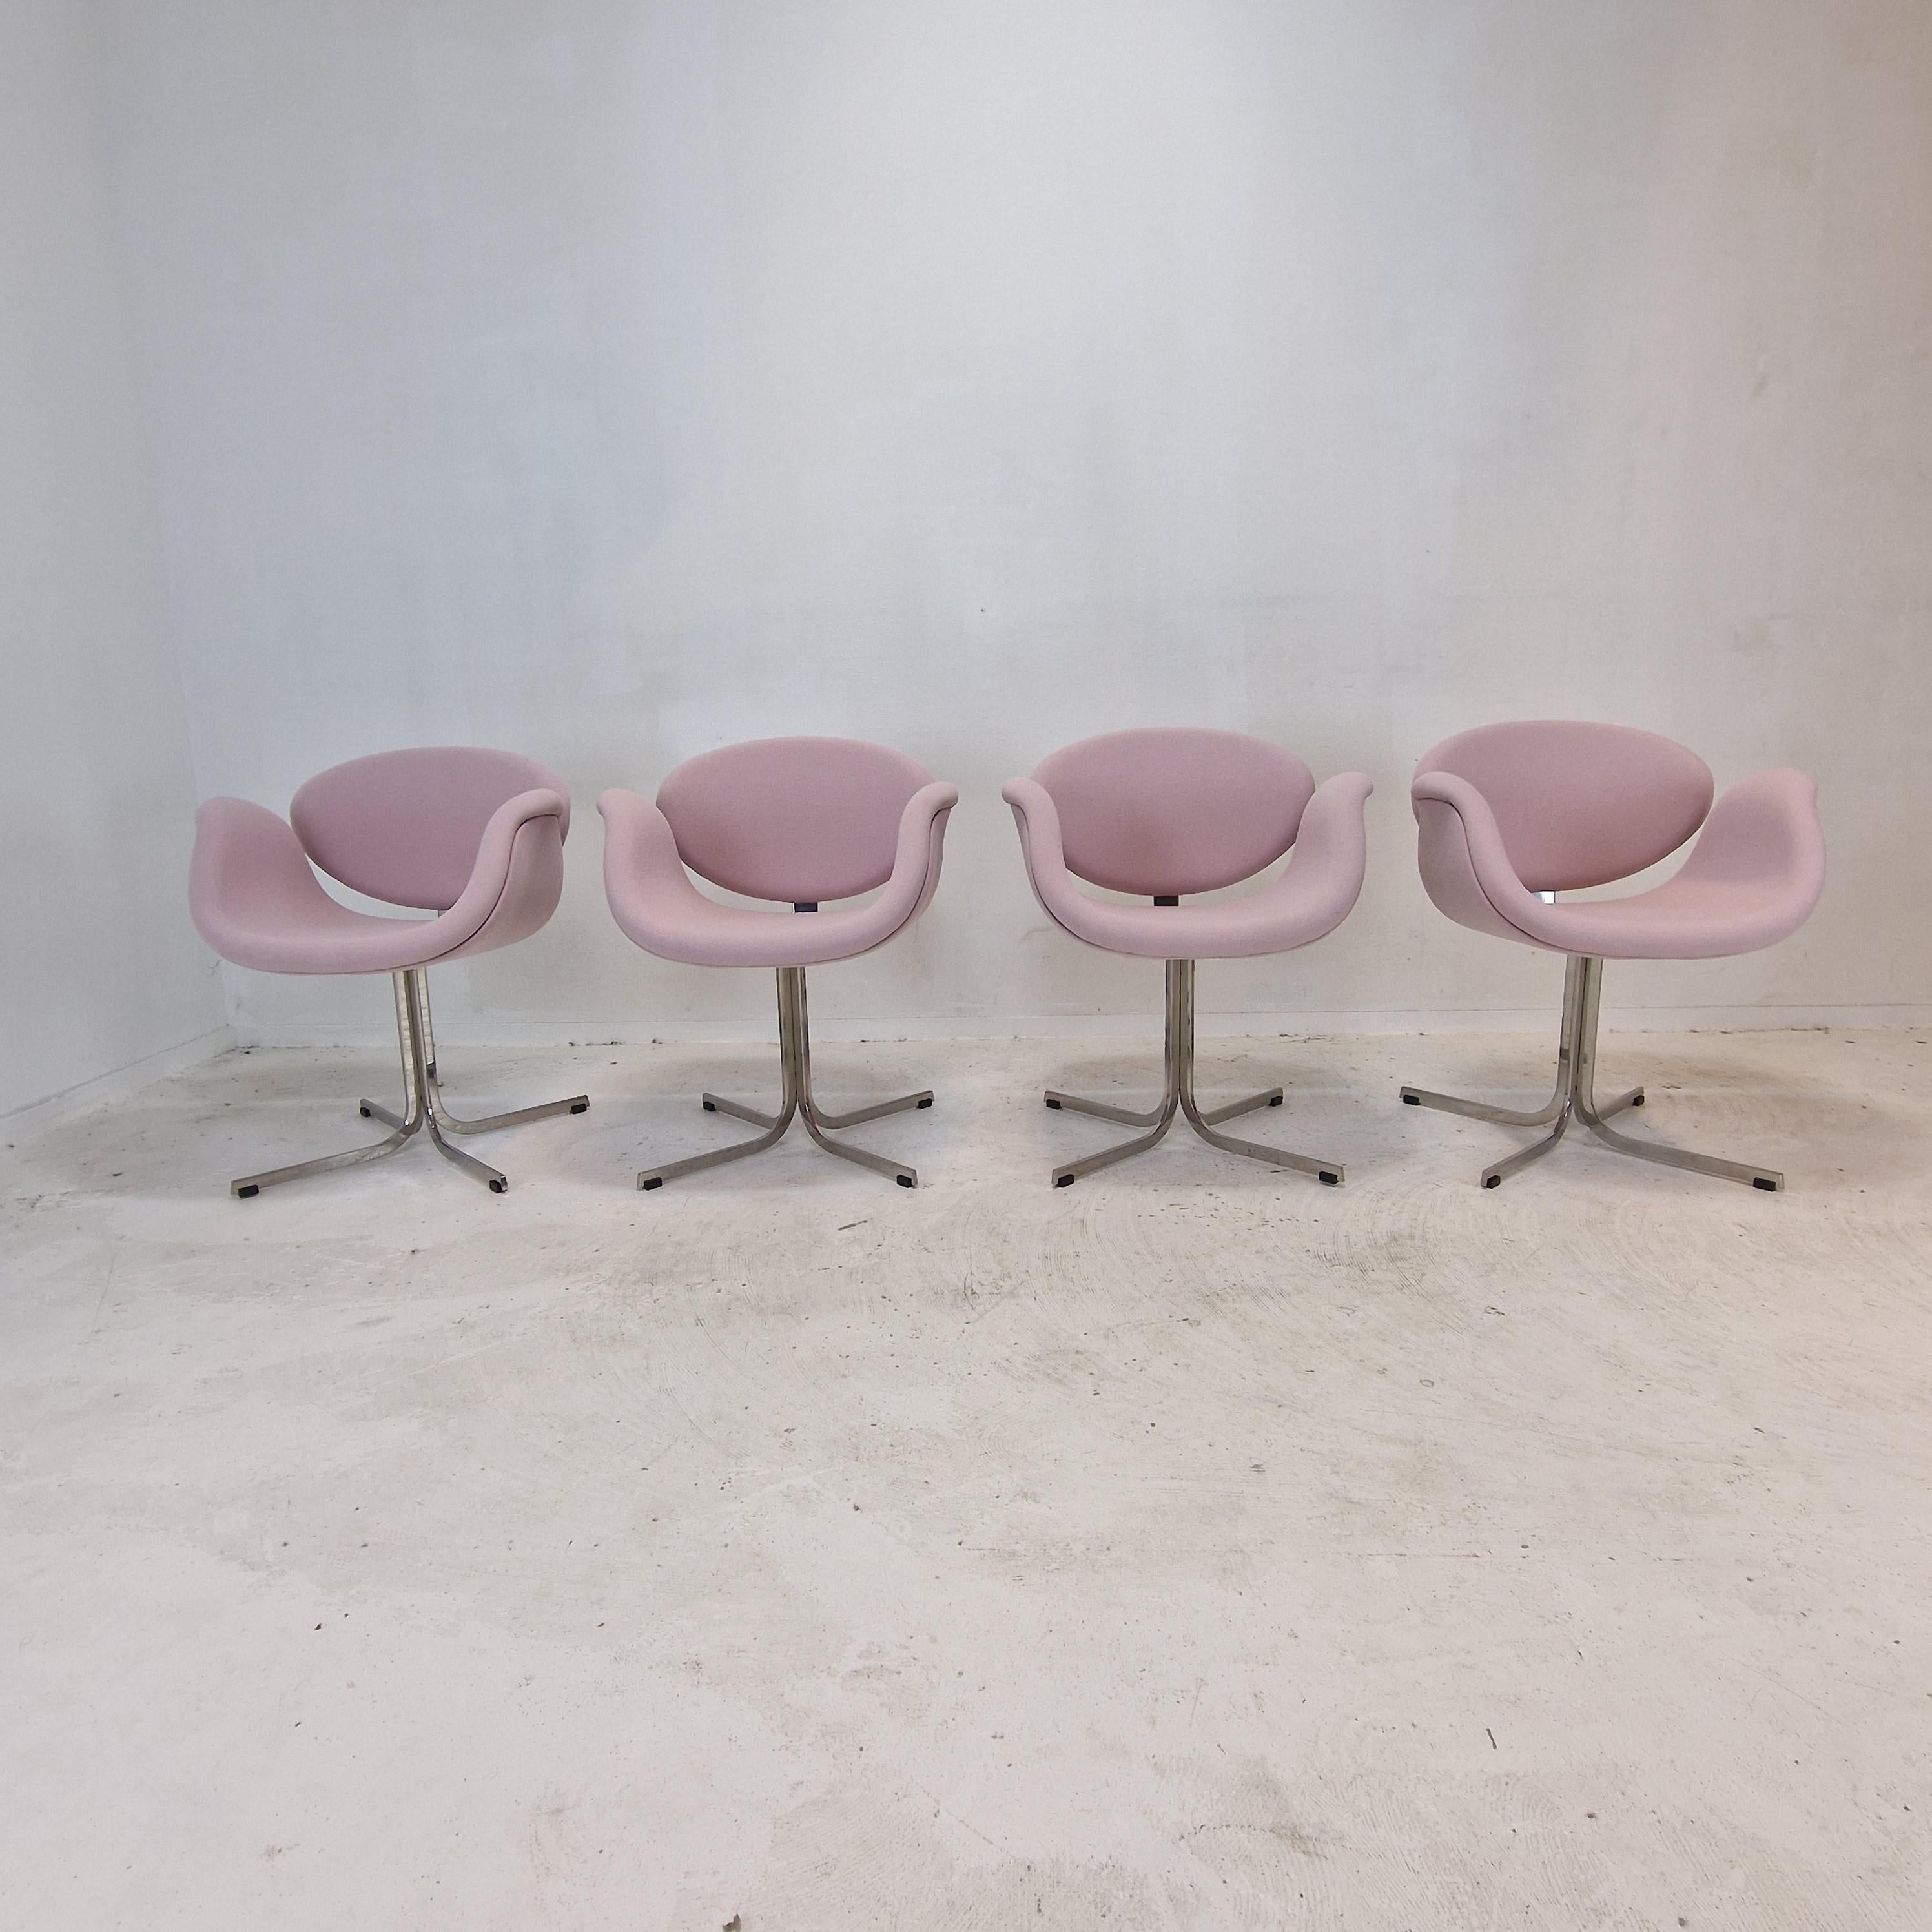 Set of 4 Little Tulip Armchairs.
These cute and very comfortable armchairs are designed by the famous French designer Pierre Paulin in the 60's. 
They are produced by Artifort.

Very solid metal cross base with a wooden frame.
The chairs are